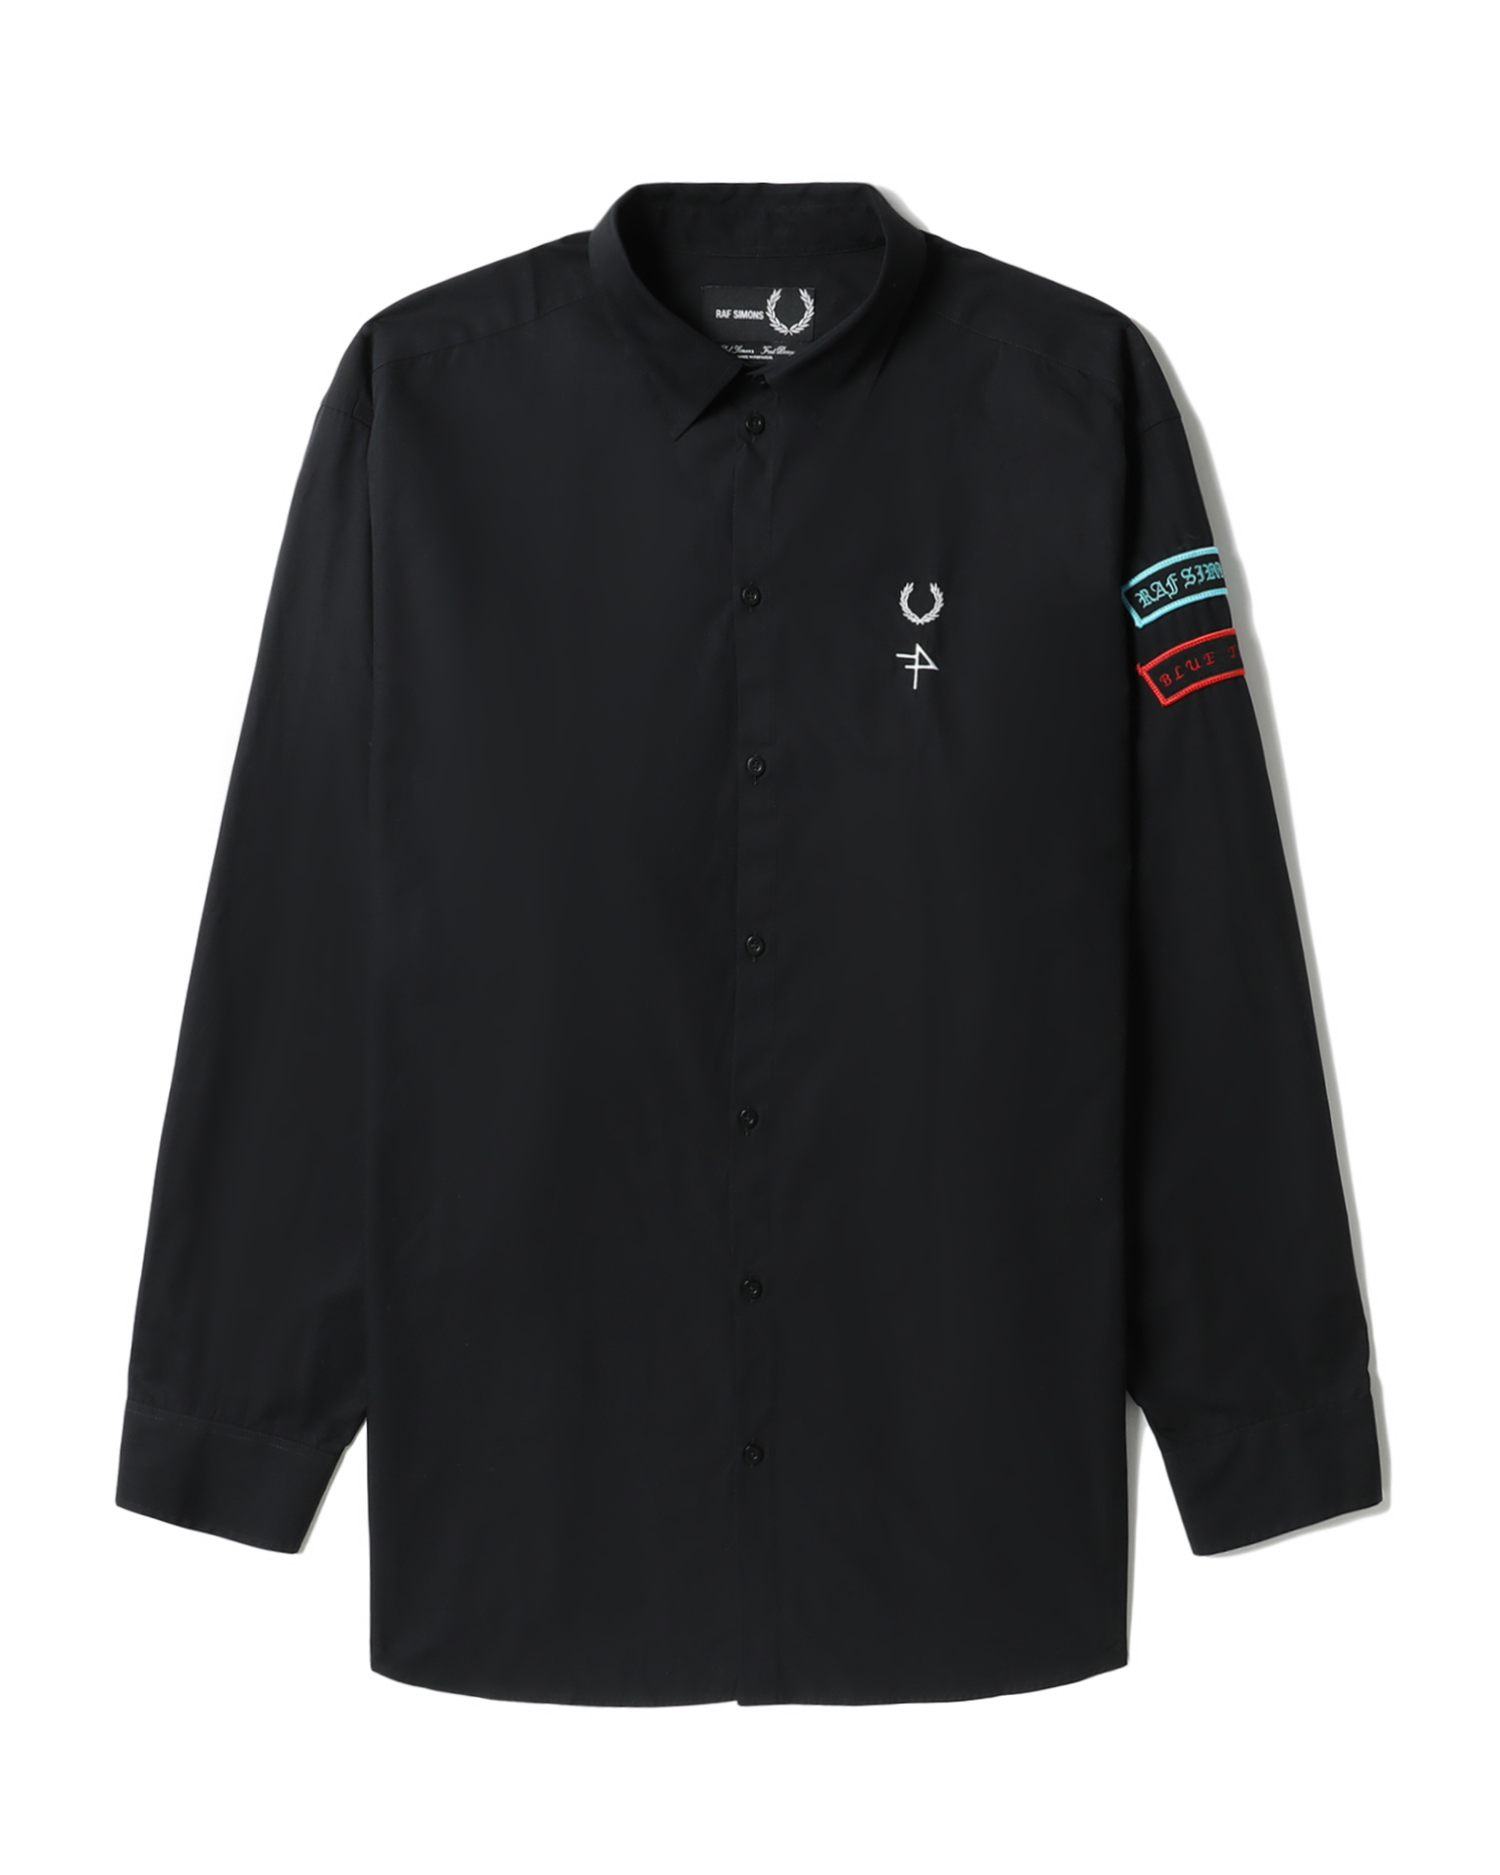 X Raf Simons patched oversized shirt